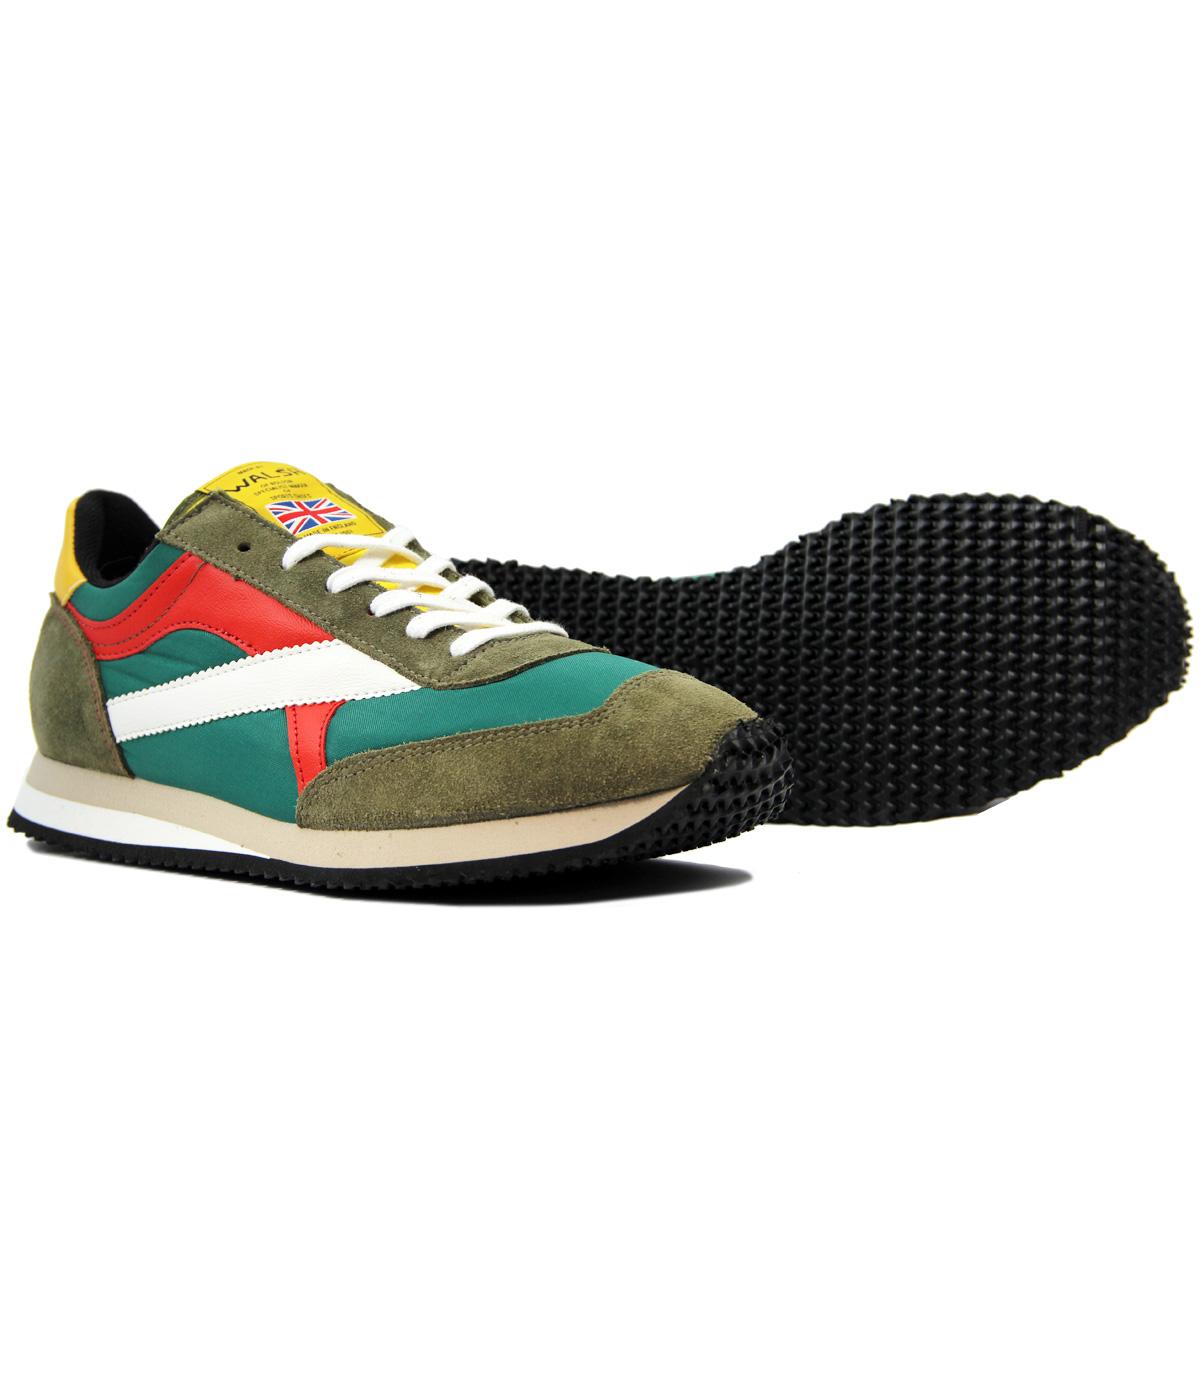 WALSH Tornado Made In England Retro 80s Trainers in Green/Yellow